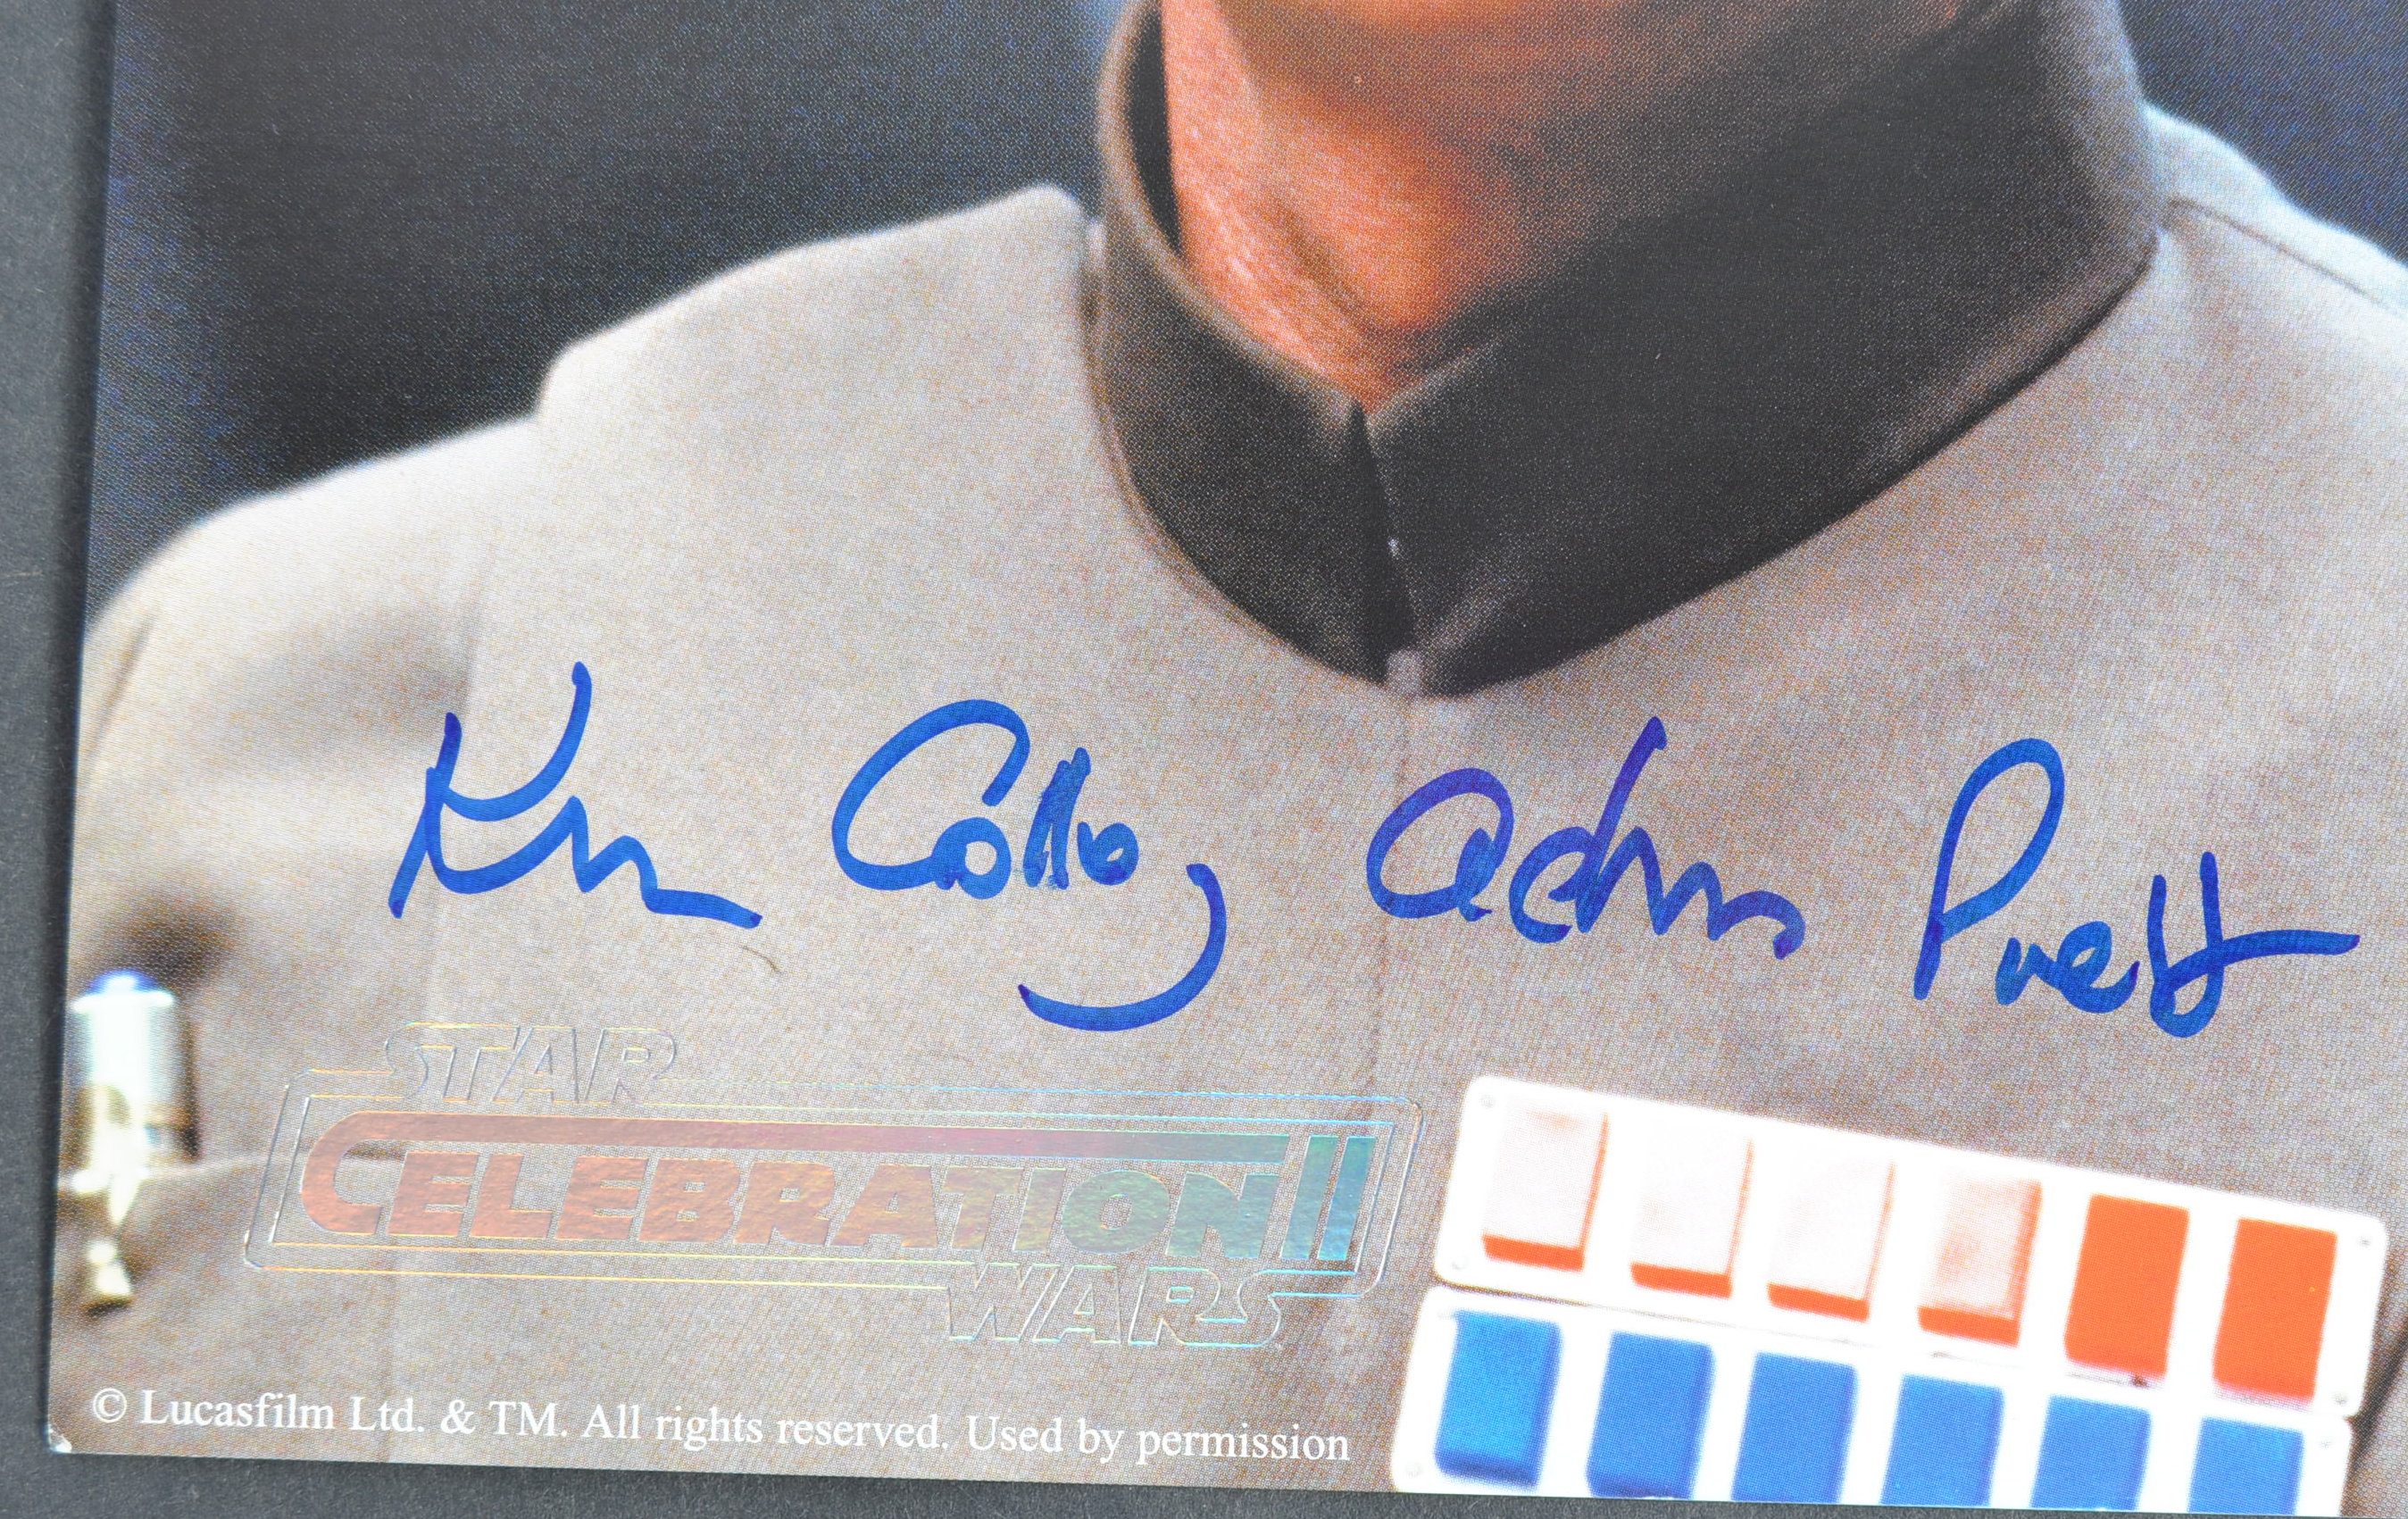 STAR WARS CELEBRATION II - OFFICIAL AUTOGRAPHED 8X10" PHOTO - Image 2 of 2